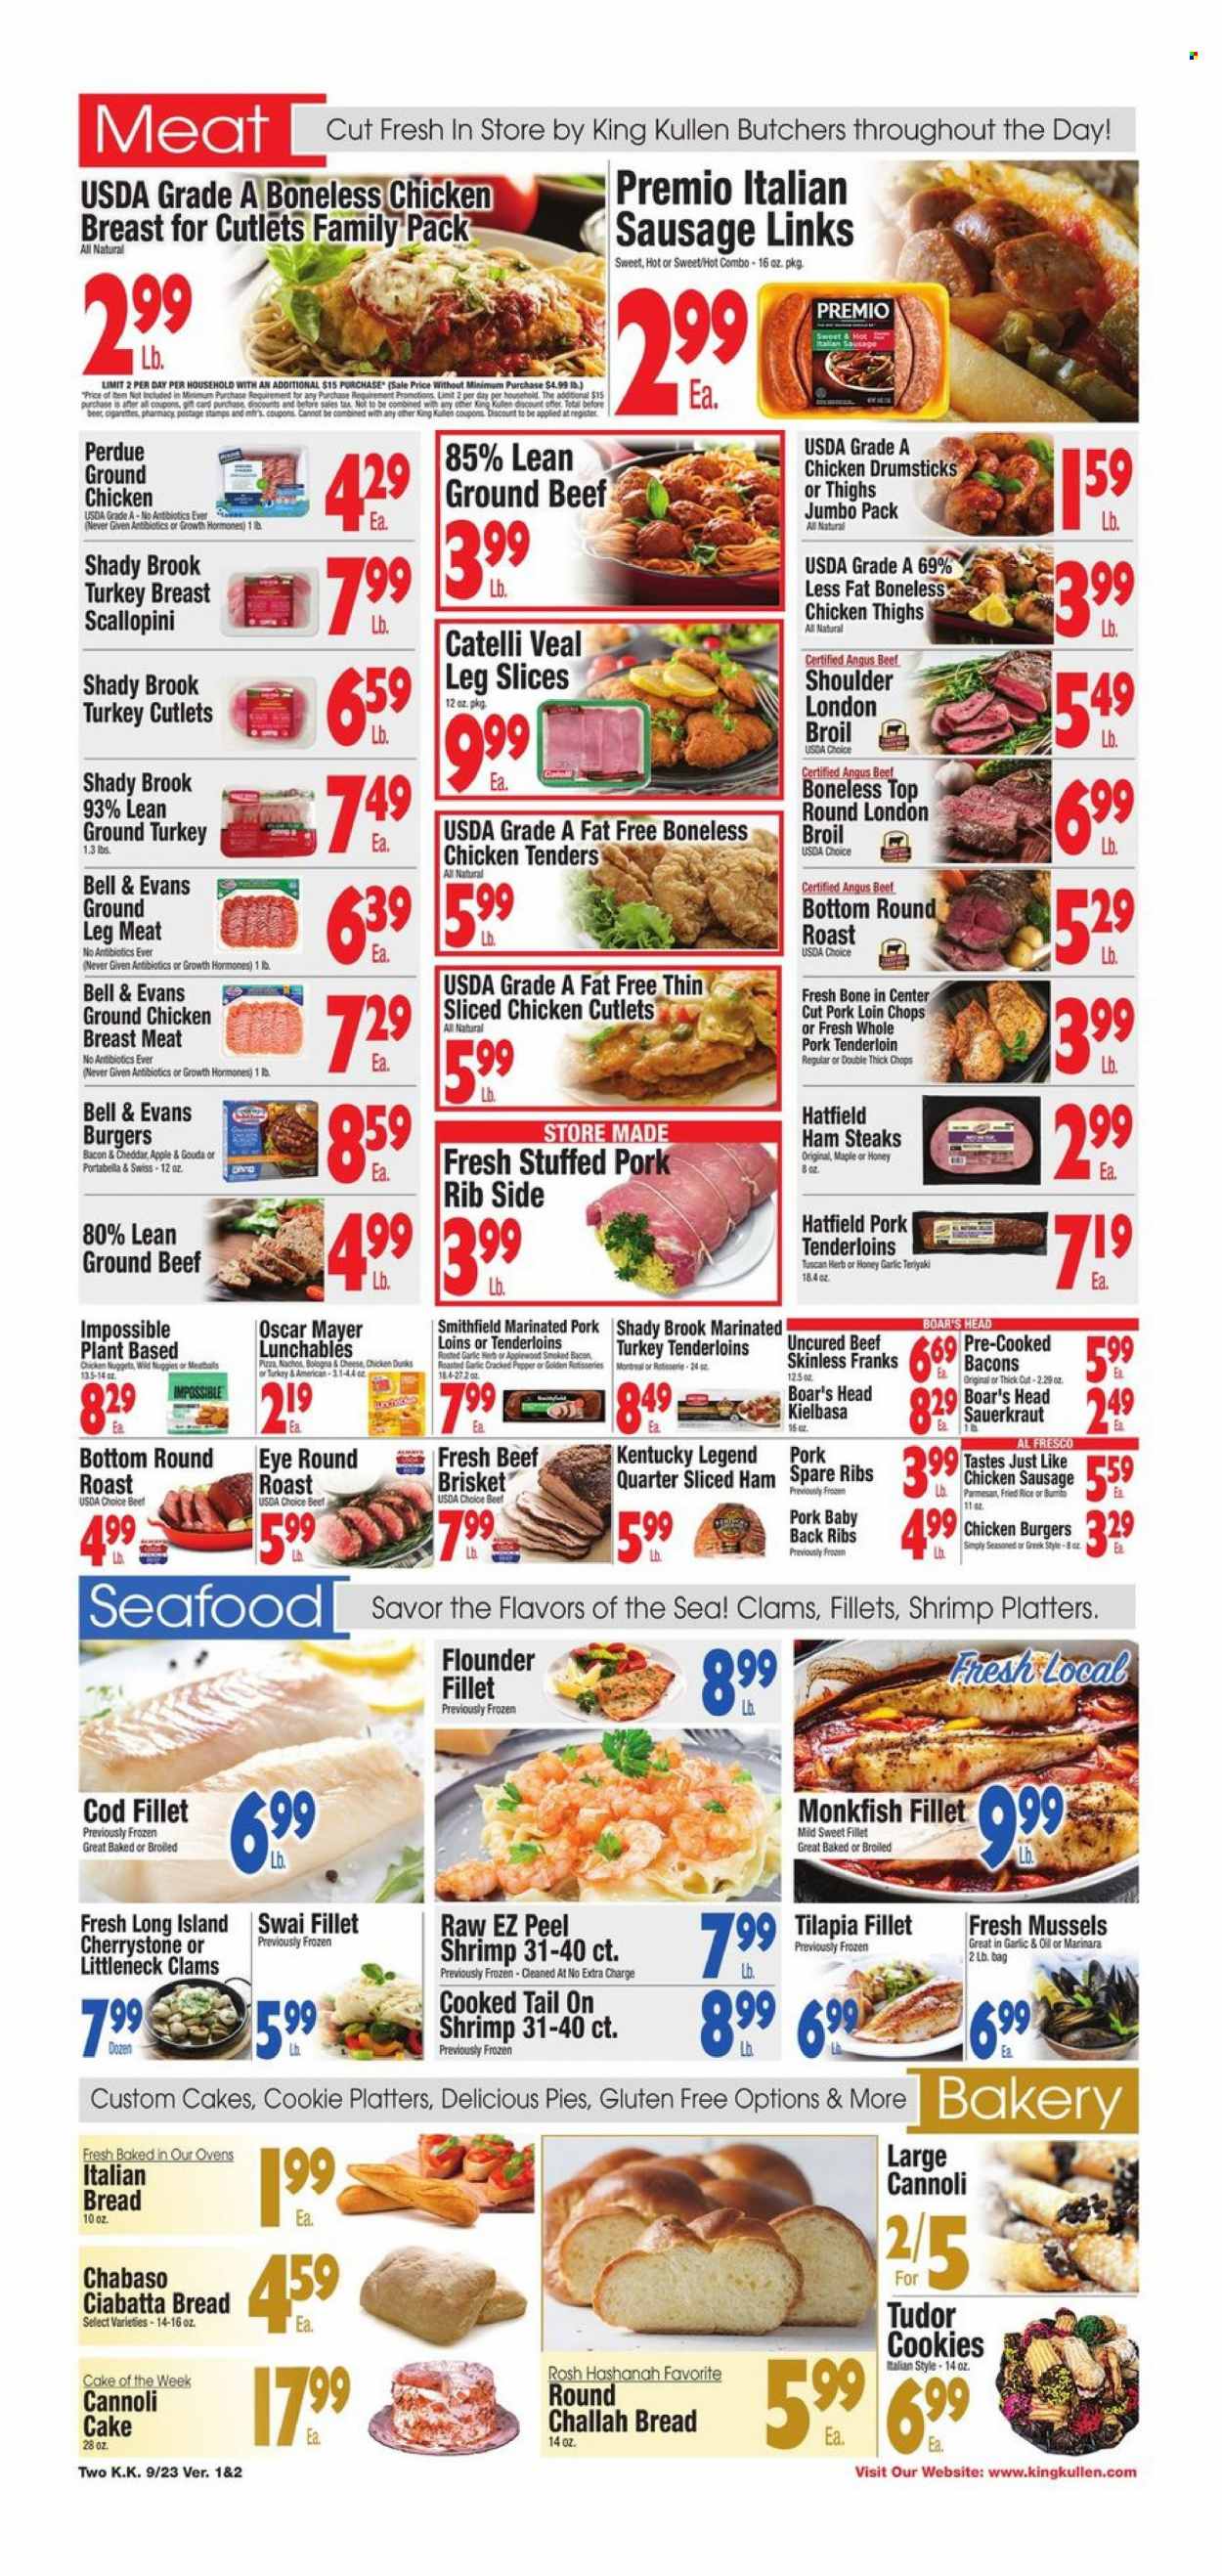 thumbnail - King Kullen Flyer - 09/23/2022 - 09/29/2022 - Sales products - bread, ciabatta, cake, challah, clams, cod, flounder, monkfish, mussels, tilapia, seafood, shrimps, swai fillet, pizza, chicken tenders, nuggets, hamburger, chicken nuggets, Perdue®, Lunchables, bacon, ham, bologna sausage, Oscar Mayer, chicken sausage, italian sausage, kielbasa, ham steaks, gouda, parmesan, cookies, sauerkraut, ground chicken, ground turkey, turkey breast, chicken breasts, chicken cutlets, chicken thighs, chicken drumsticks, turkey tenderloin, beef meat, ground beef, steak, round roast, beef brisket, pork chops, pork loin, pork meat, pork ribs, pork tenderloin, pork spare ribs, pork back ribs, marinated pork. Page 2.